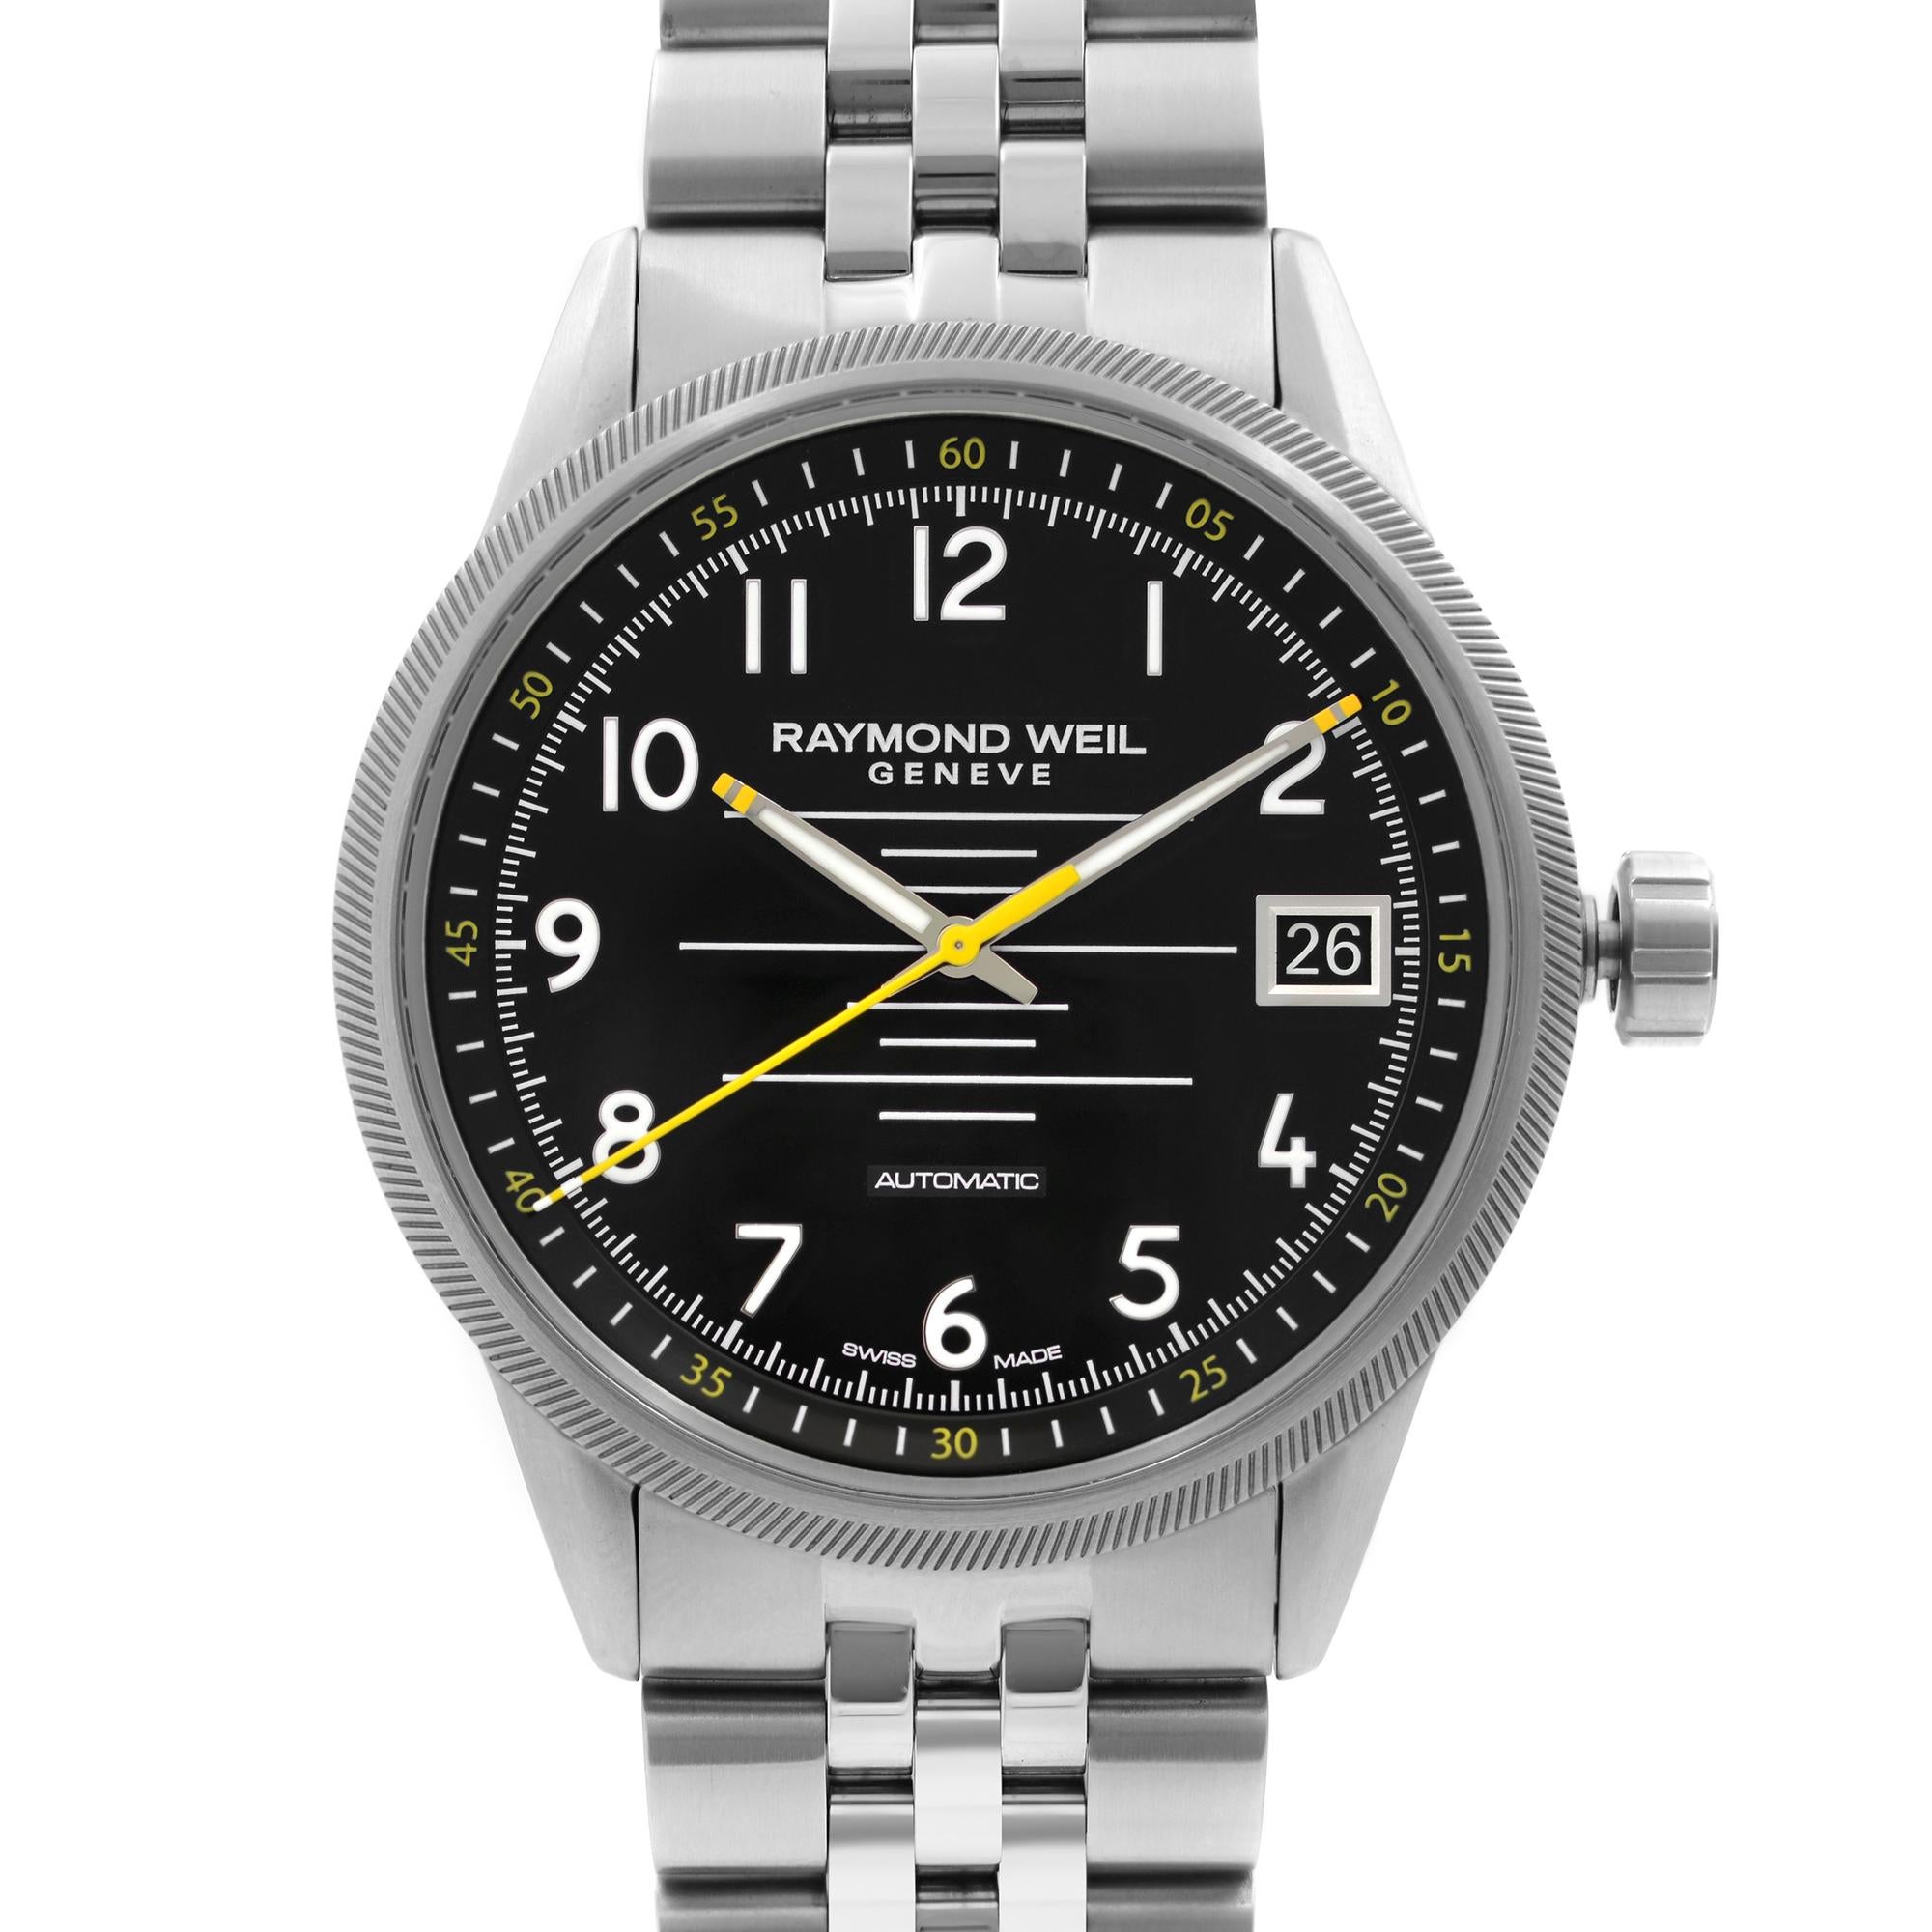 Never Worn Raymond Weil Freelancer 42mm Steel Black Dial Automatic Men's Watch 2754-ST-05200. This Beautiful Timepiece Features: Stainless Steel Case and Bracelet, Fixed Stainless Steel Bezel, Black Dial with Silver-Tone Hands, And Arabic Numeral